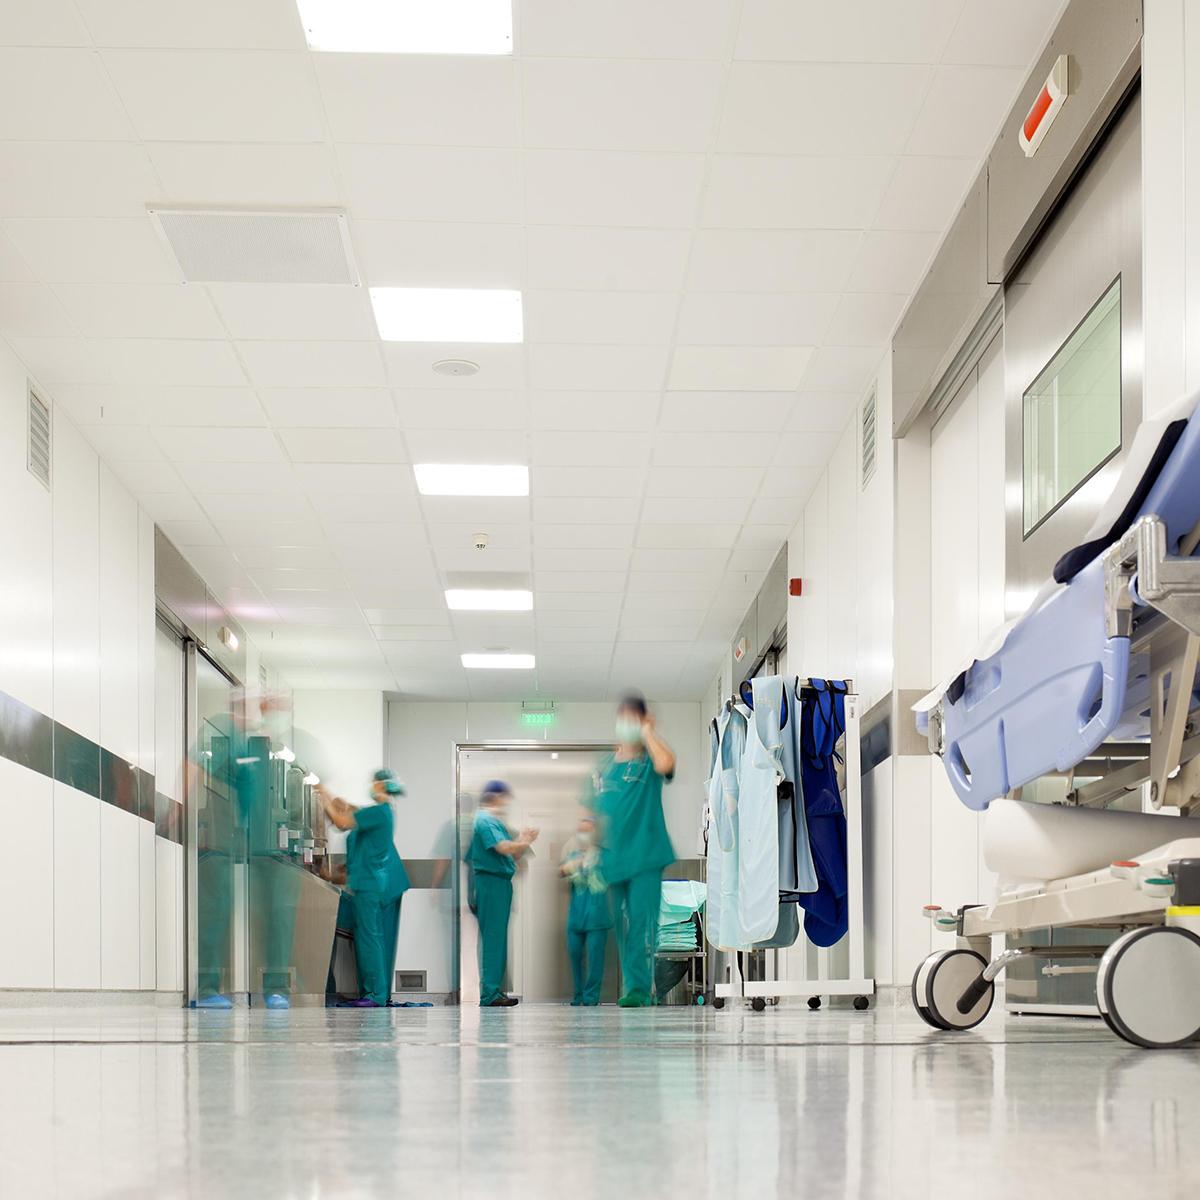 Blurred photo of a busy hospital corridor